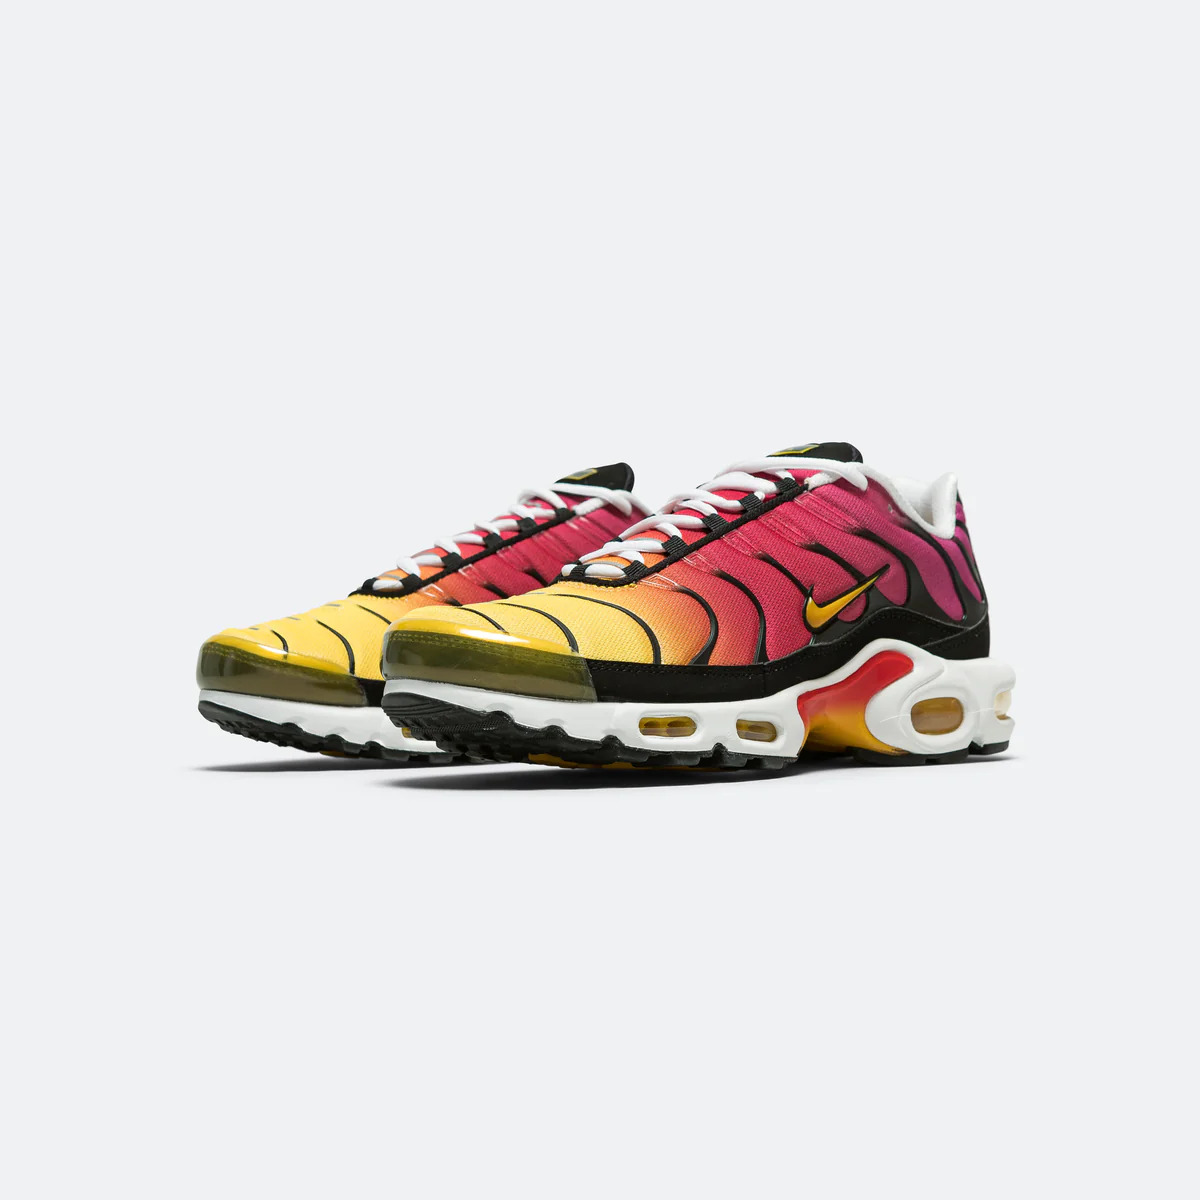 nike air max 98 tour yellow ebay shoes sale india OG Gold Raspberry Red DX0755-600 Full Shoes